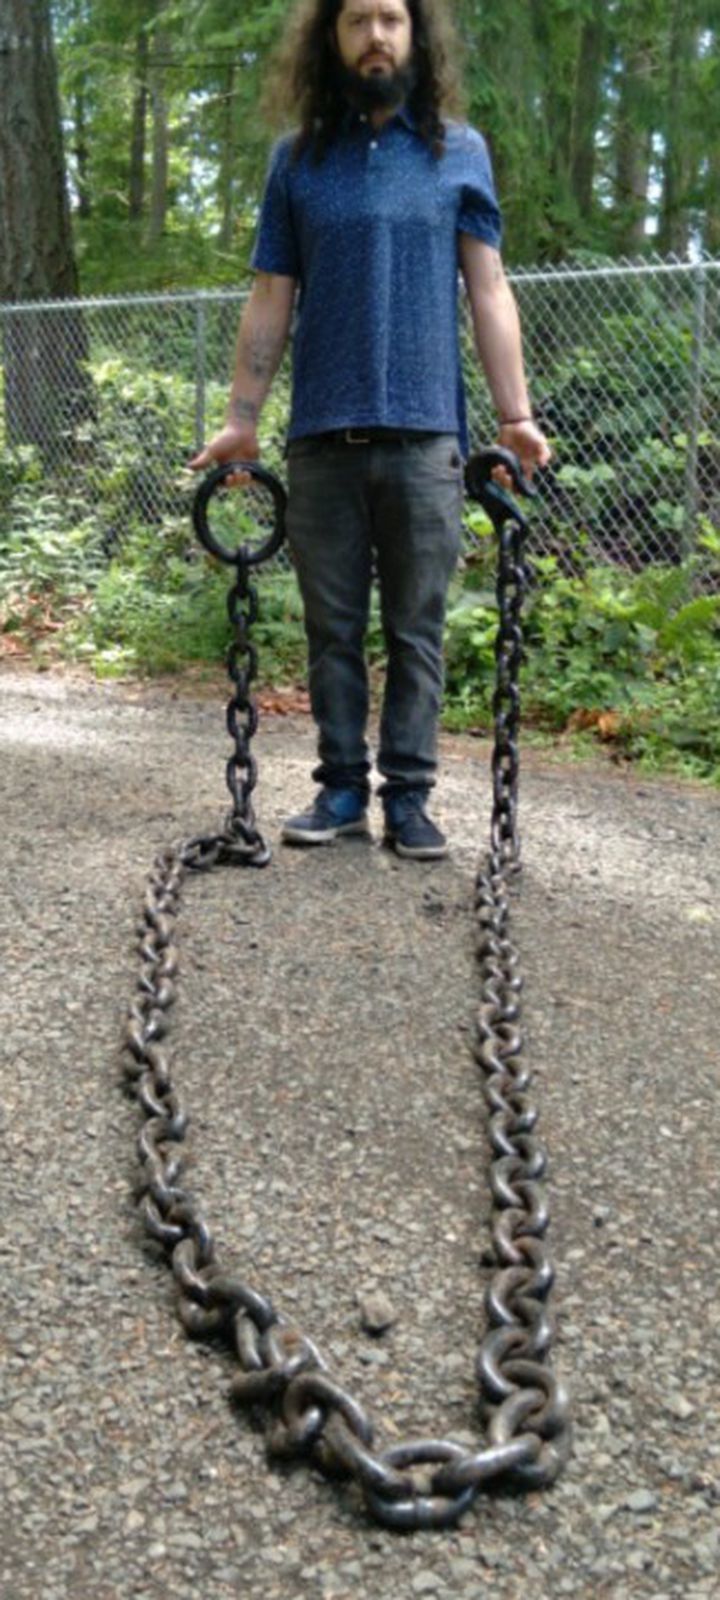 Rigging Chain Tow Chain  Make Offers